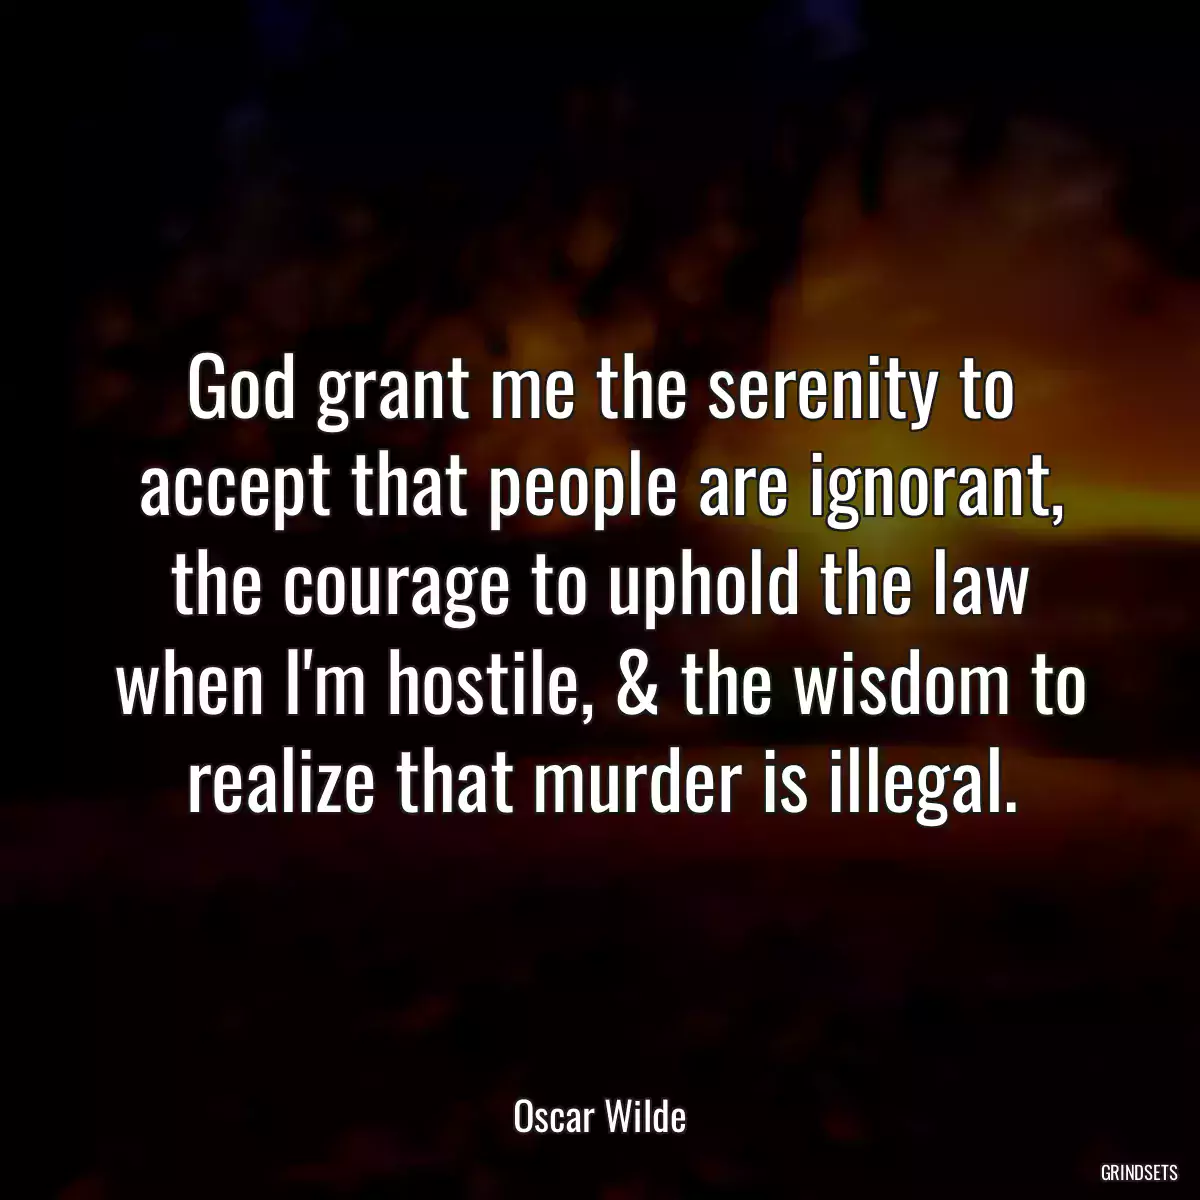 God grant me the serenity to accept that people are ignorant, the courage to uphold the law when I\'m hostile, & the wisdom to realize that murder is illegal.